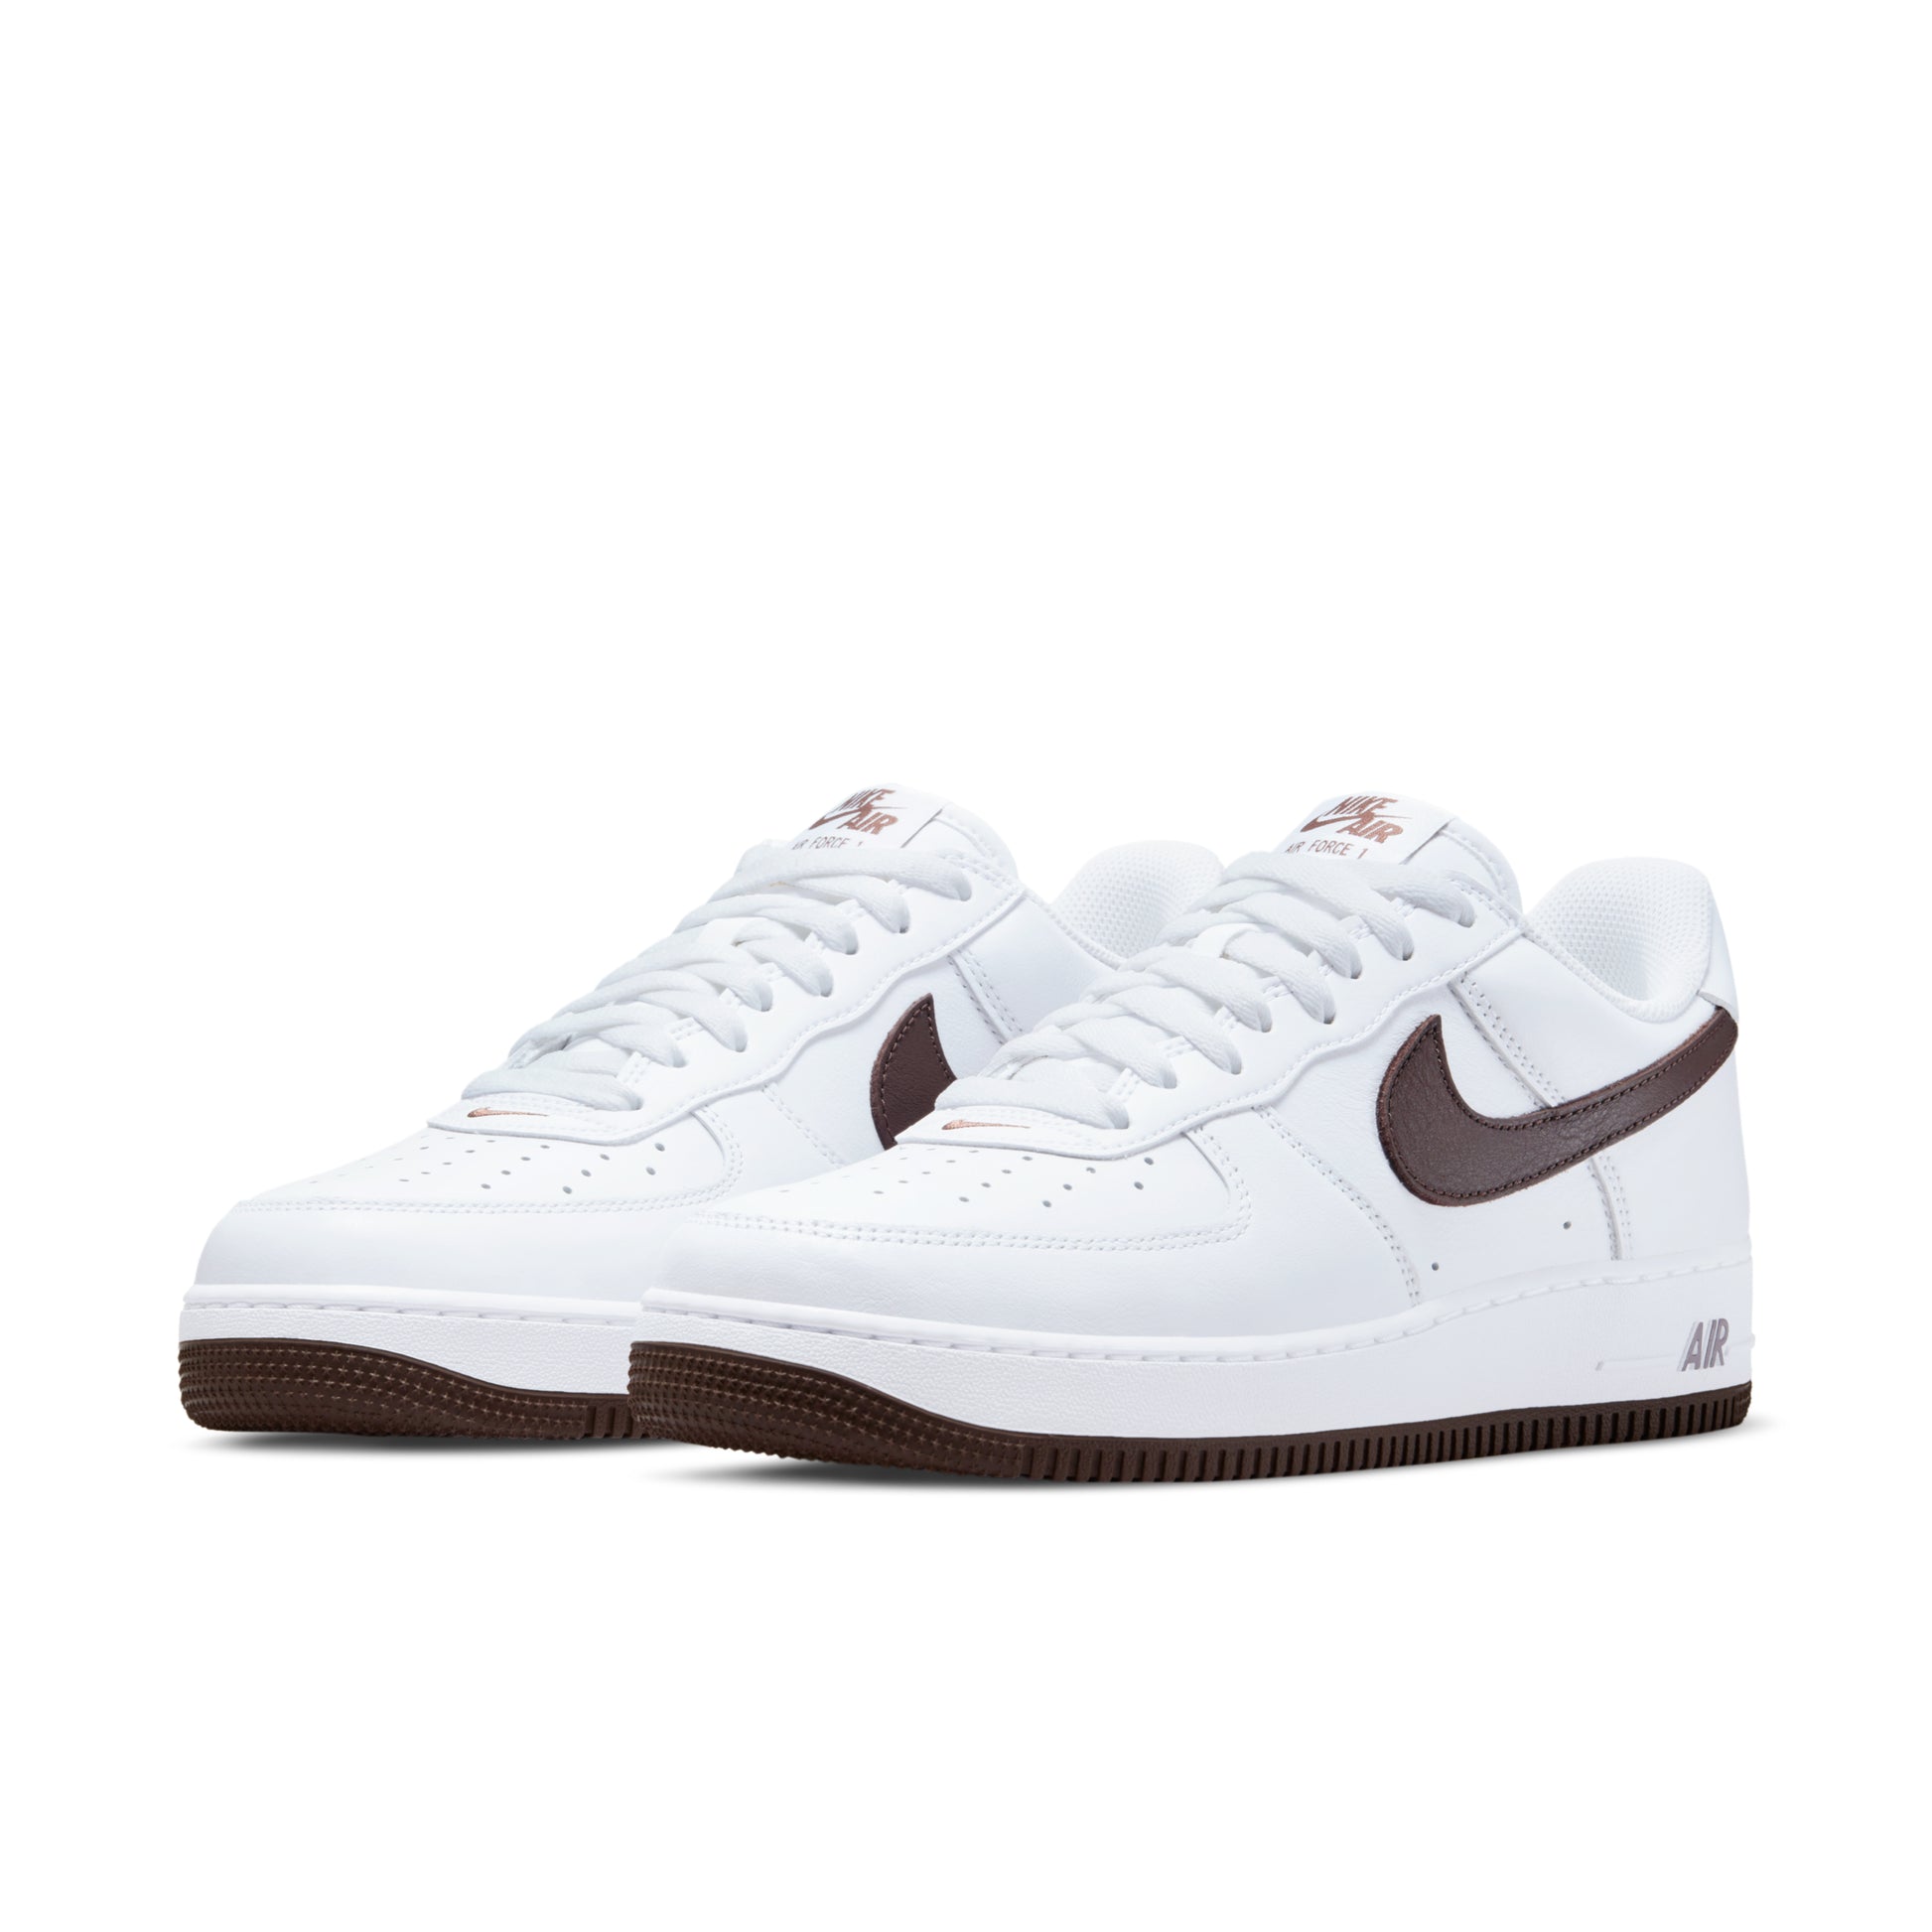 Nike Air Force 1 '07 Low Color of the Month White Chocolate